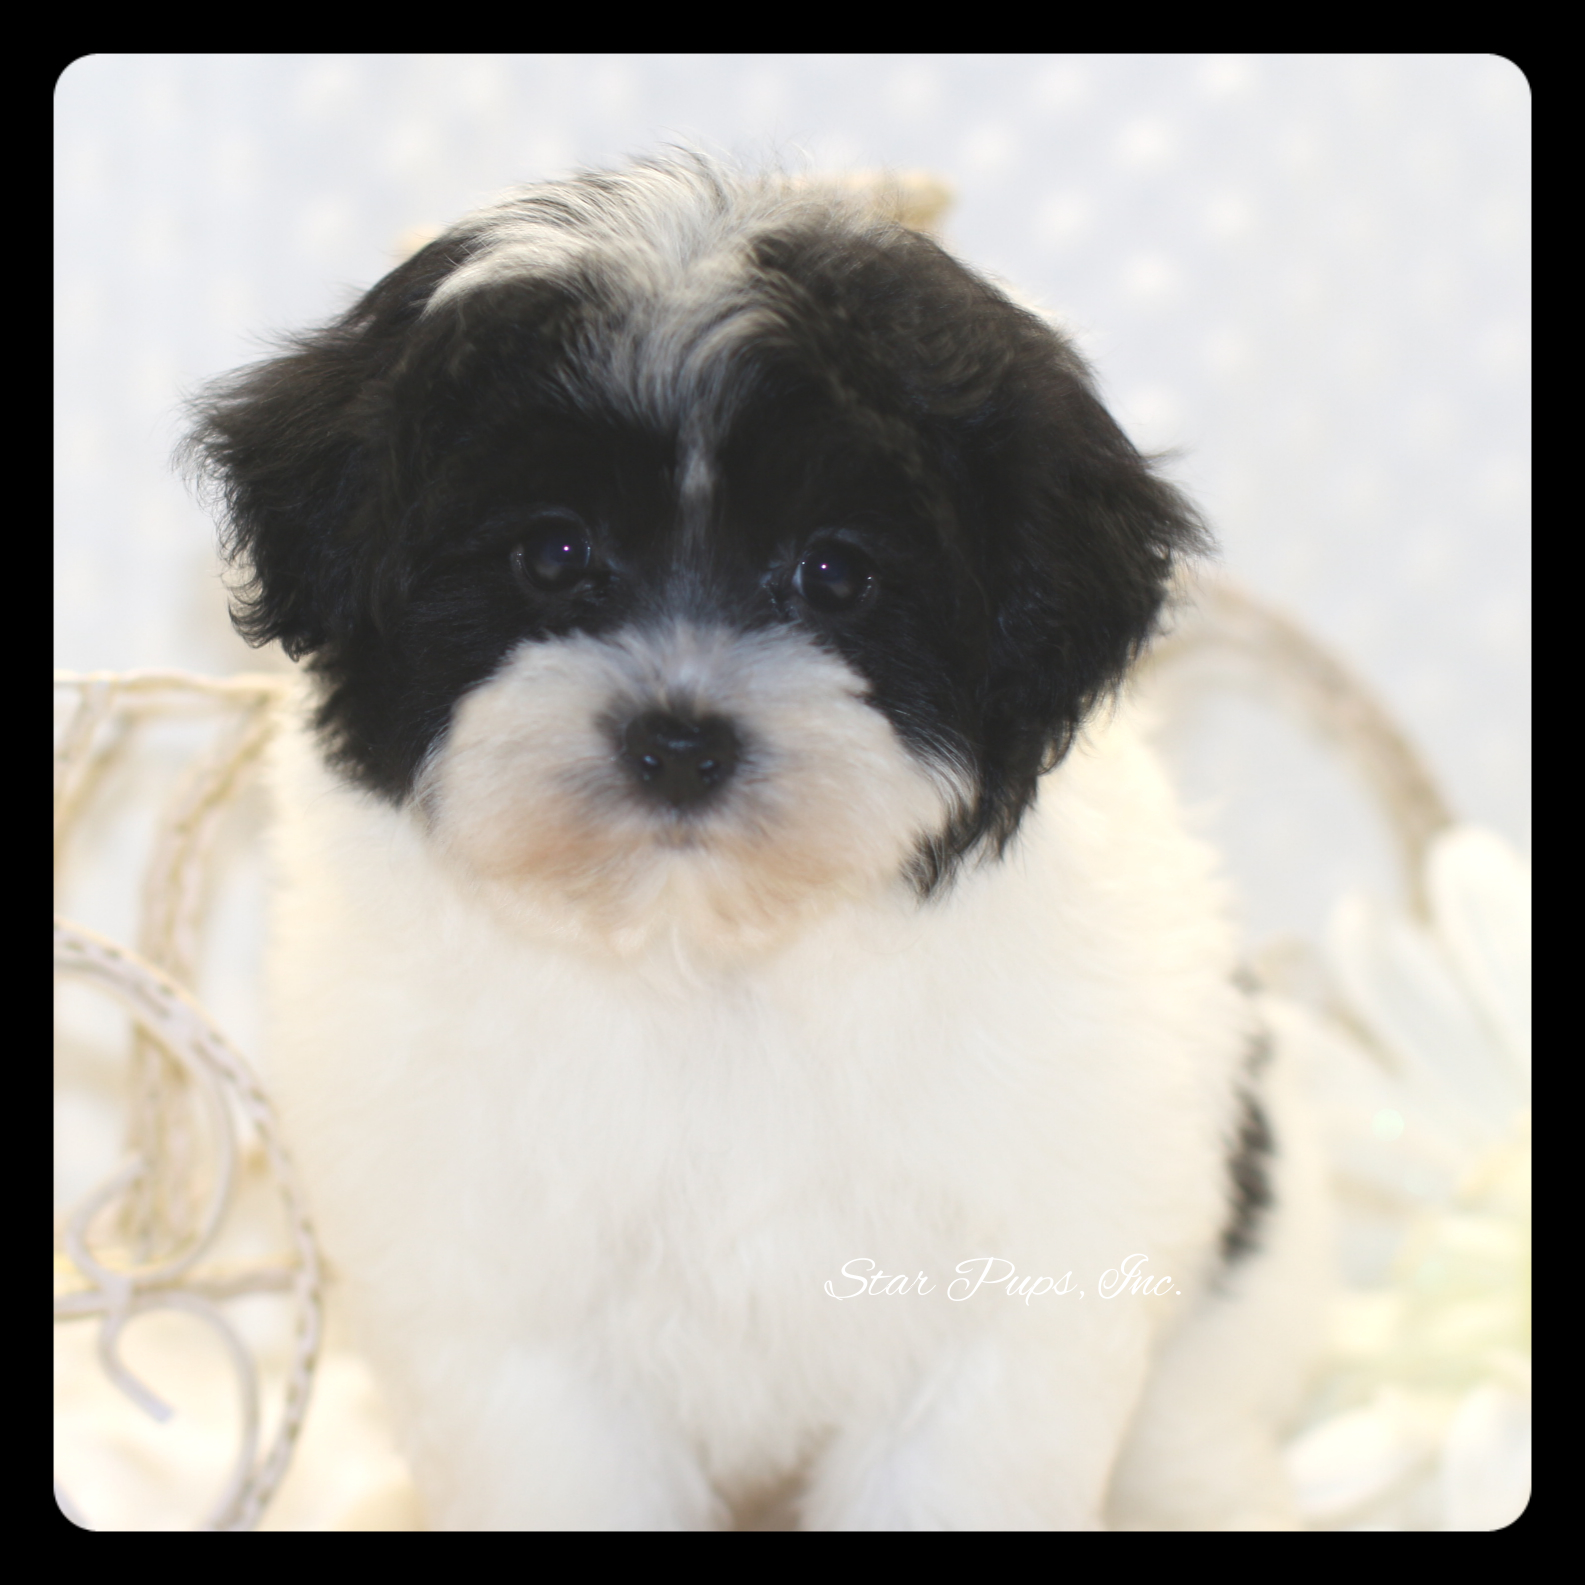 black and white shih poo puppies